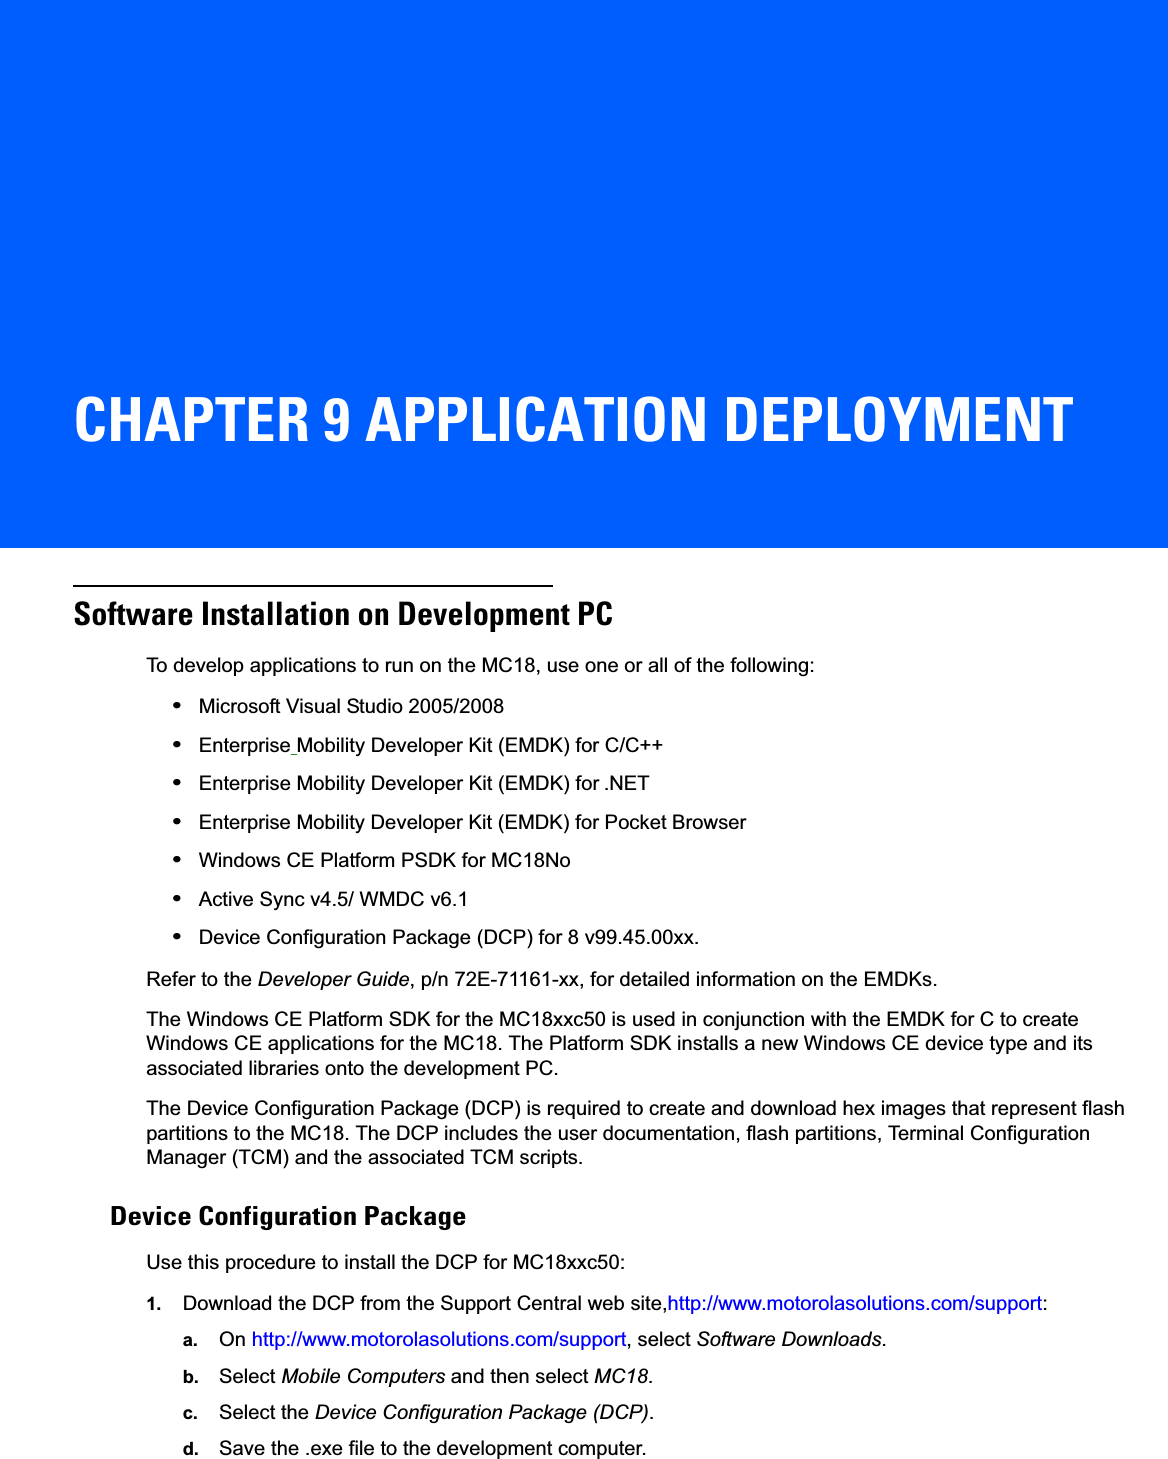 CHAPTER 9 APPLICATION DEPLOYMENTSoftware Installation on Development PCTo develop applications to run on the MC18, use one or all of the following:•Microsoft Visual Studio 2005/2008•Enterprise Mobility Developer Kit (EMDK) for C/C++•Enterprise Mobility Developer Kit (EMDK) for .NET•Enterprise Mobility Developer Kit (EMDK) for Pocket Browser•Windows CE Platform PSDK for MC18No•Active Sync v4.5/ WMDC v6.1•Device Configuration Package (DCP) for 8 v99.45.00xx.Refer to the Developer Guide, p/n 72E-71161-xx, for detailed information on the EMDKs.The Windows CE Platform SDK for the MC18xxc50 is used in conjunction with the EMDK for C to create Windows CE applications for the MC18. The Platform SDK installs a new Windows CE device type and its associated libraries onto the development PC.The Device Configuration Package (DCP) is required to create and download hex images that represent flash partitions to the MC18. The DCP includes the user documentation, flash partitions, Terminal Configuration Manager (TCM) and the associated TCM scripts.Device Configuration PackageUse this procedure to install the DCP for MC18xxc50:1. Download the DCP from the Support Central web site,http://www.motorolasolutions.com/support:a. On http://www.motorolasolutions.com/support, select Software Downloads.b. Select Mobile Computers and then select MC18.c. Select the Device Configuration Package (DCP).d. Save the .exe file to the development computer.